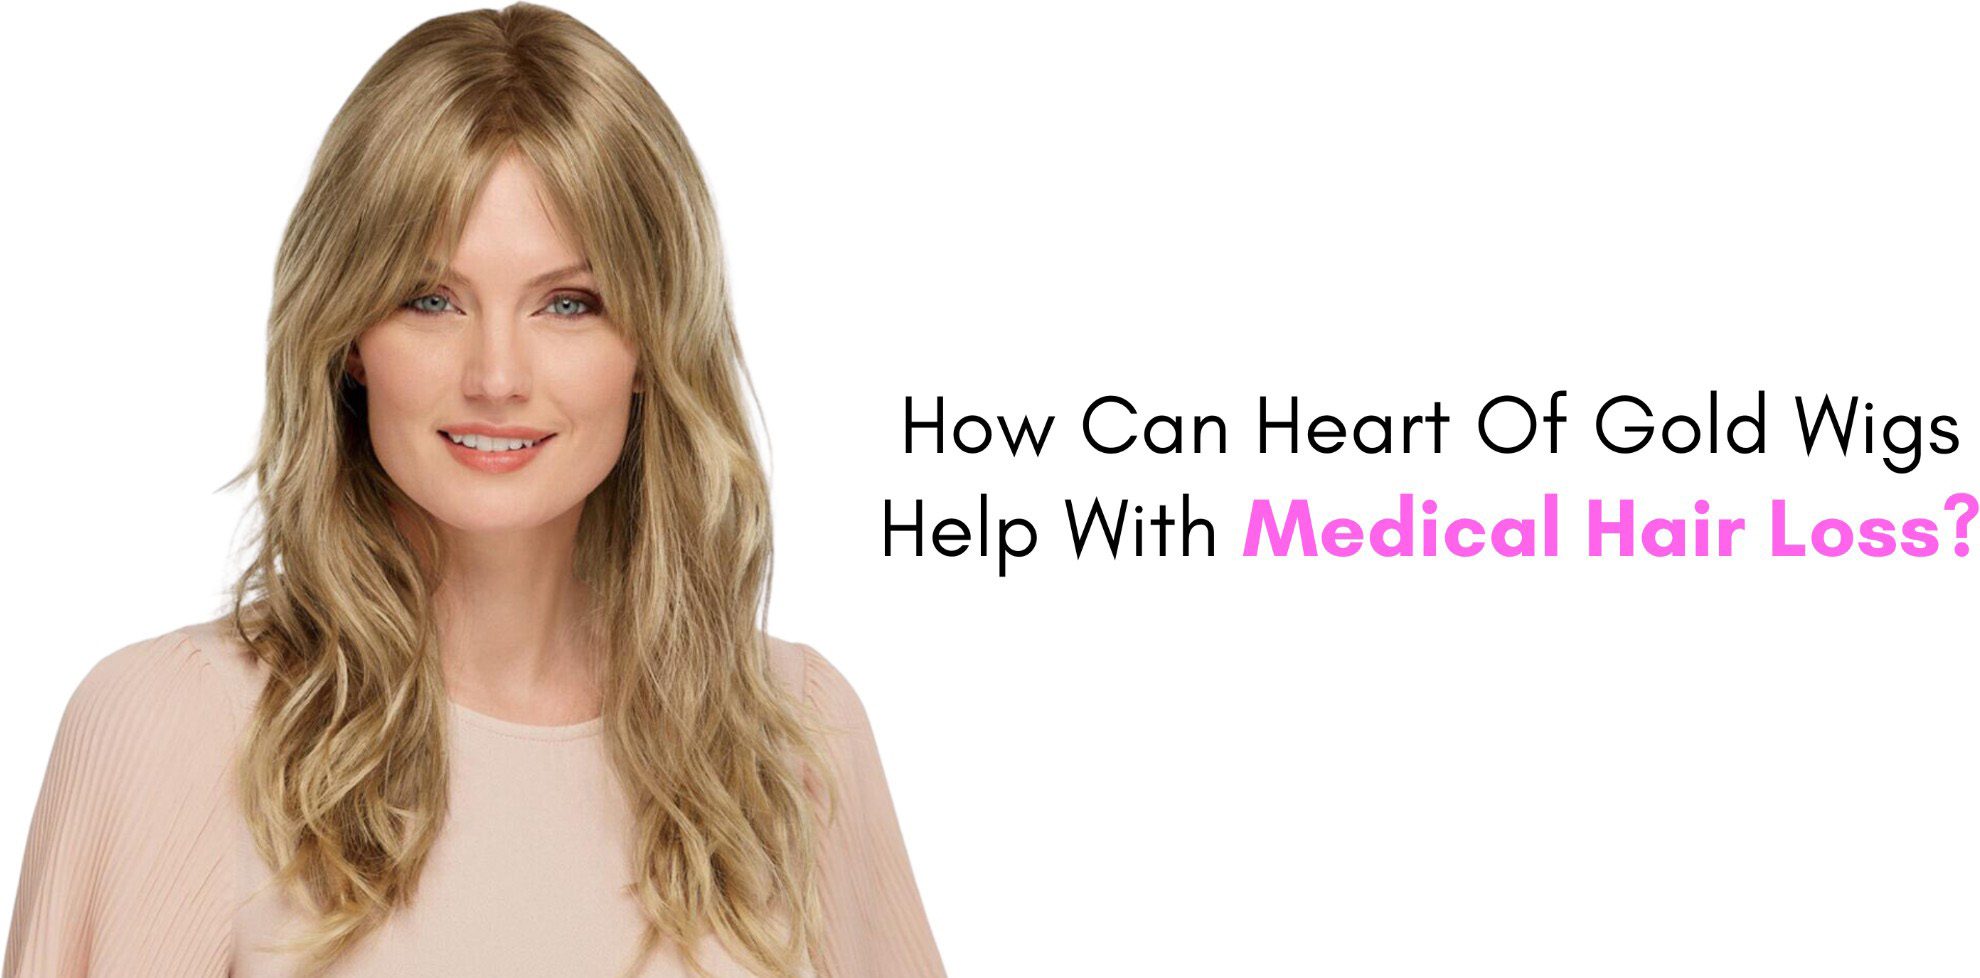 How Can Heart Of Gold Wigs Help With Medical Hair Loss?